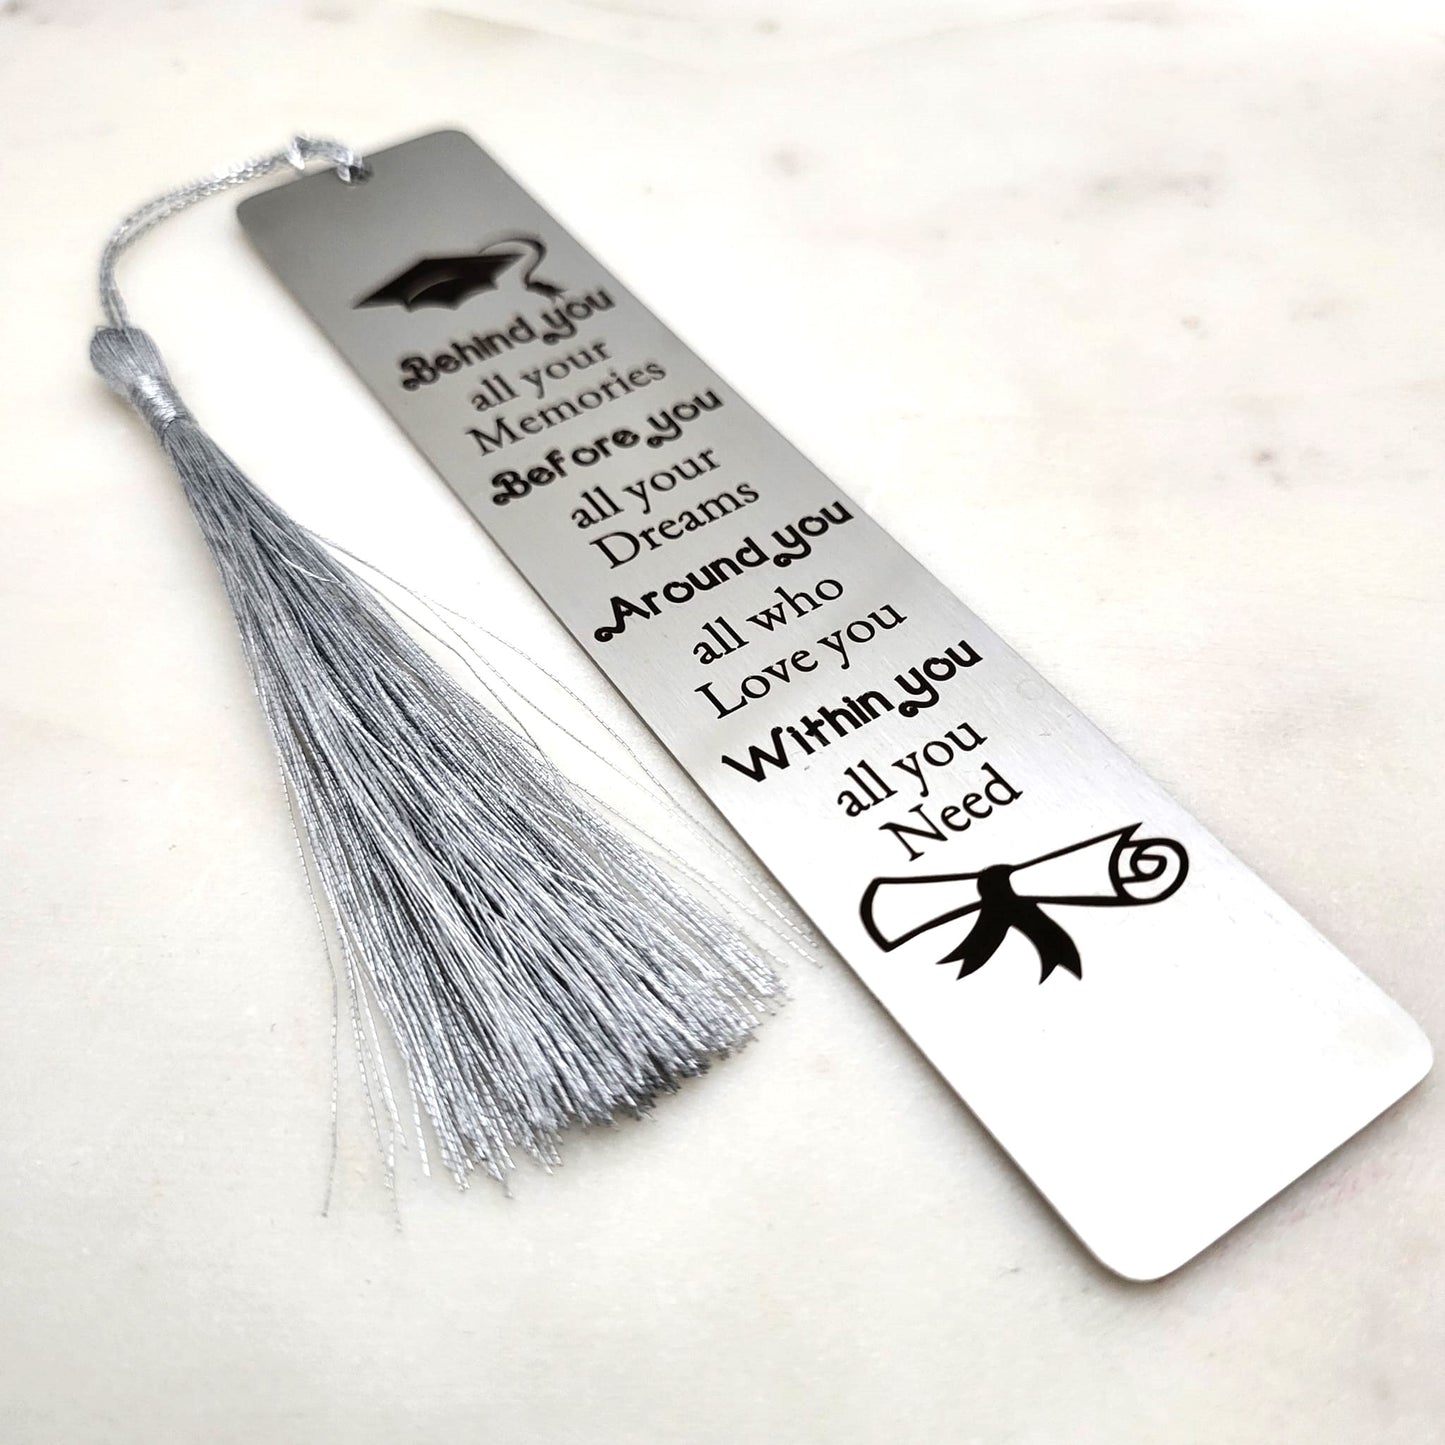 Inspirational Bookmark with Quote Behind you all your memories, Before you all your Dreams.